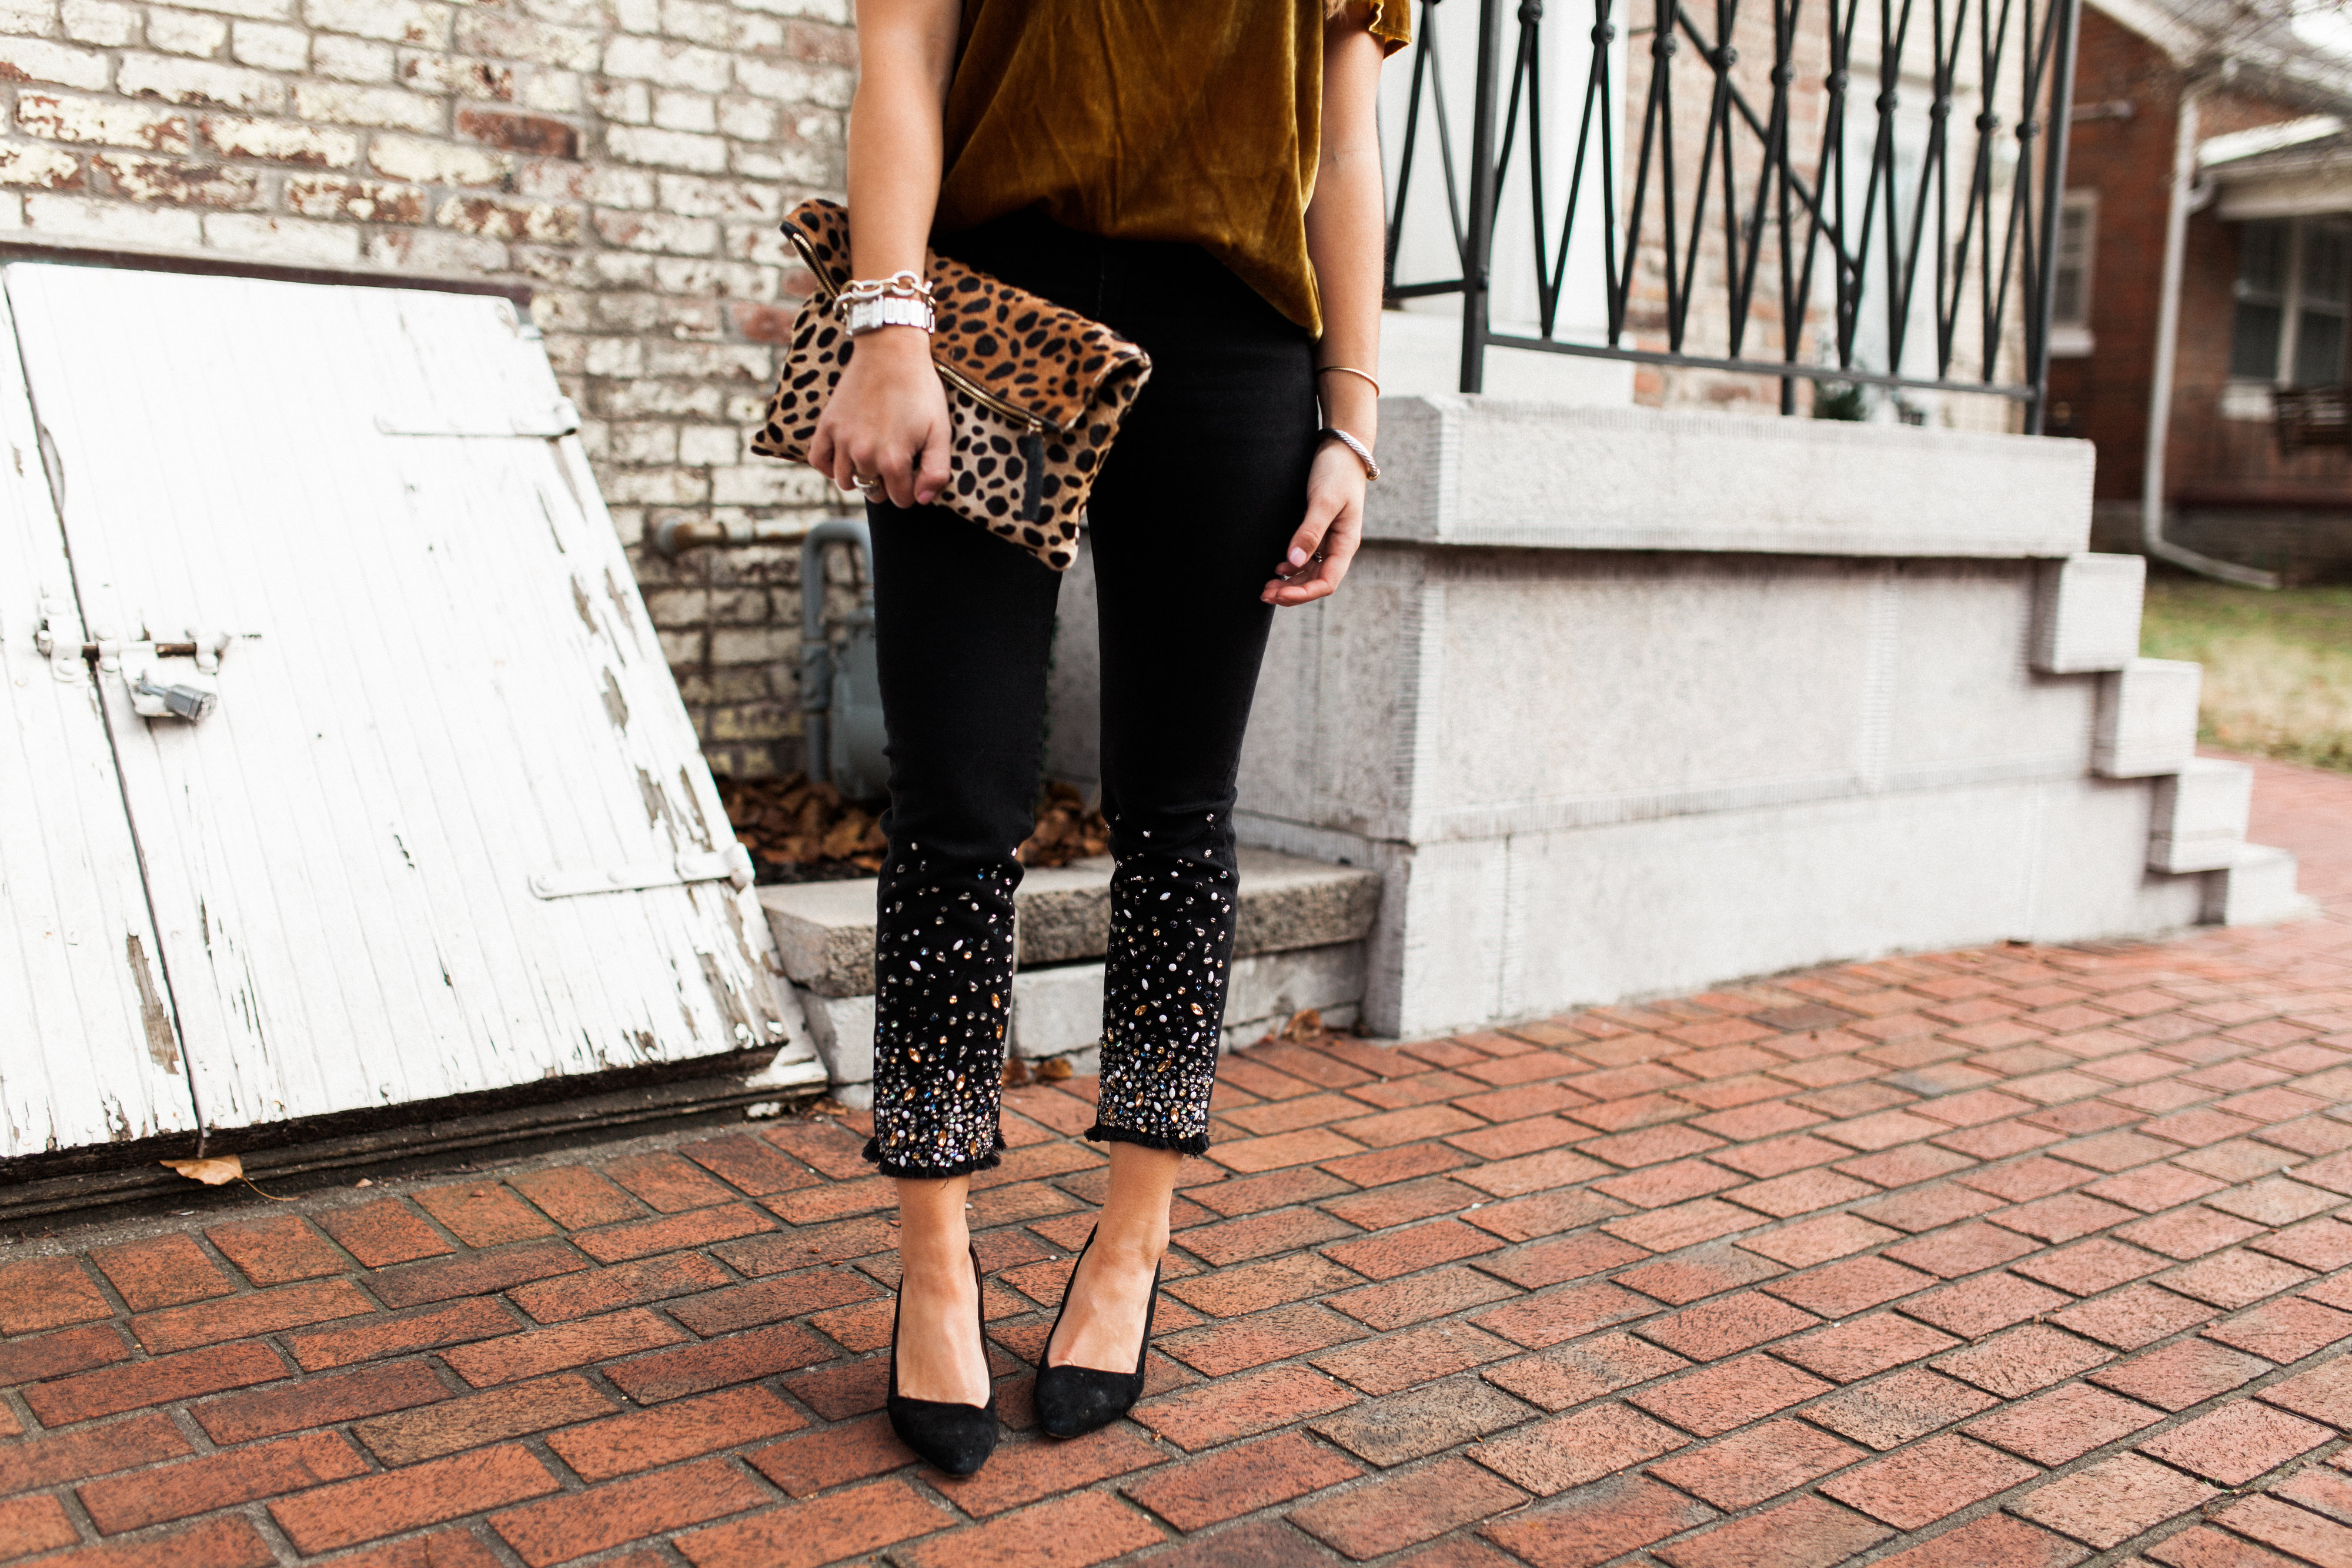 How to wear embellished jeans